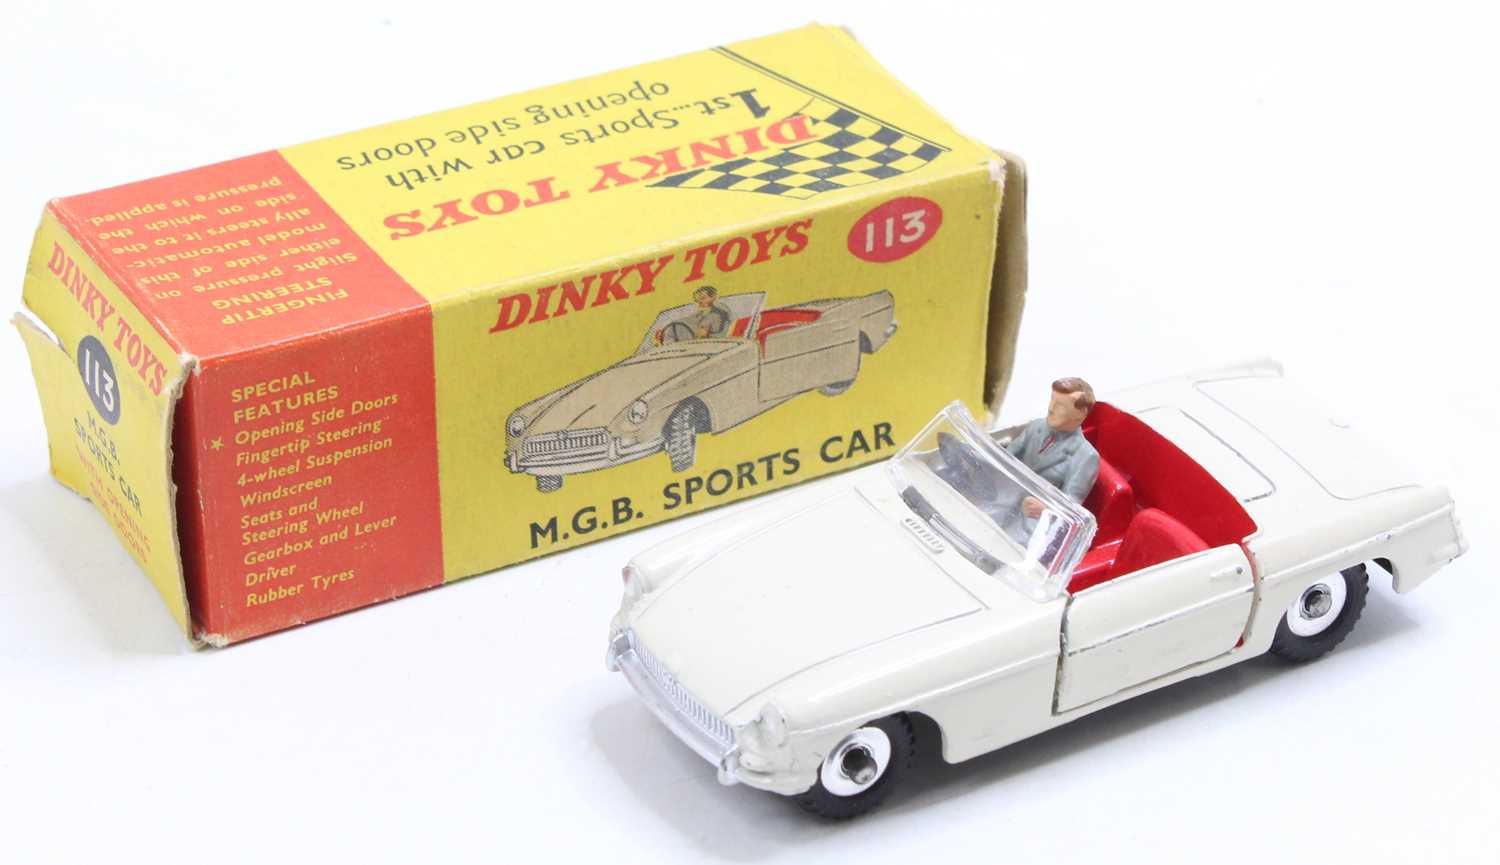 Dinky Toys No. 113 MGB sports car comprising cream body with red interior and driver figure, sold in